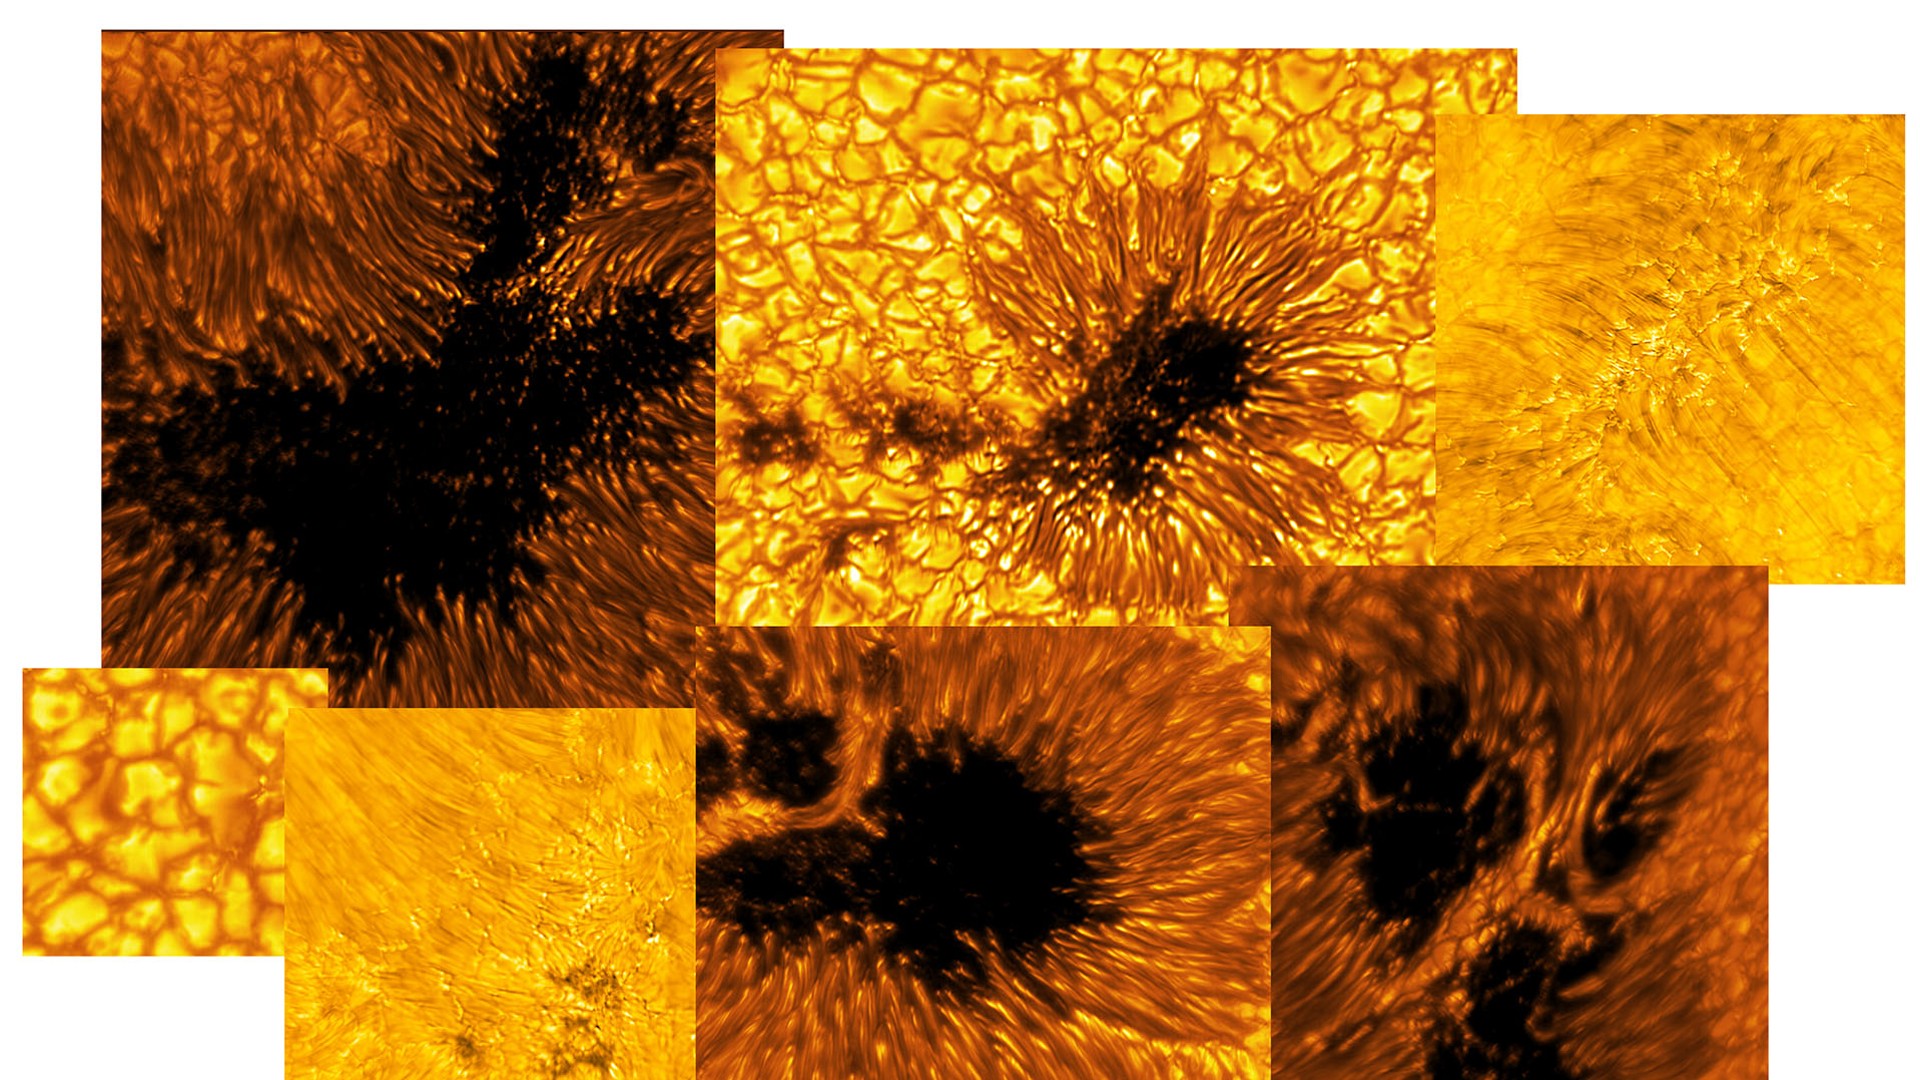  See amazing new sun photos from the world's largest solar telescope 